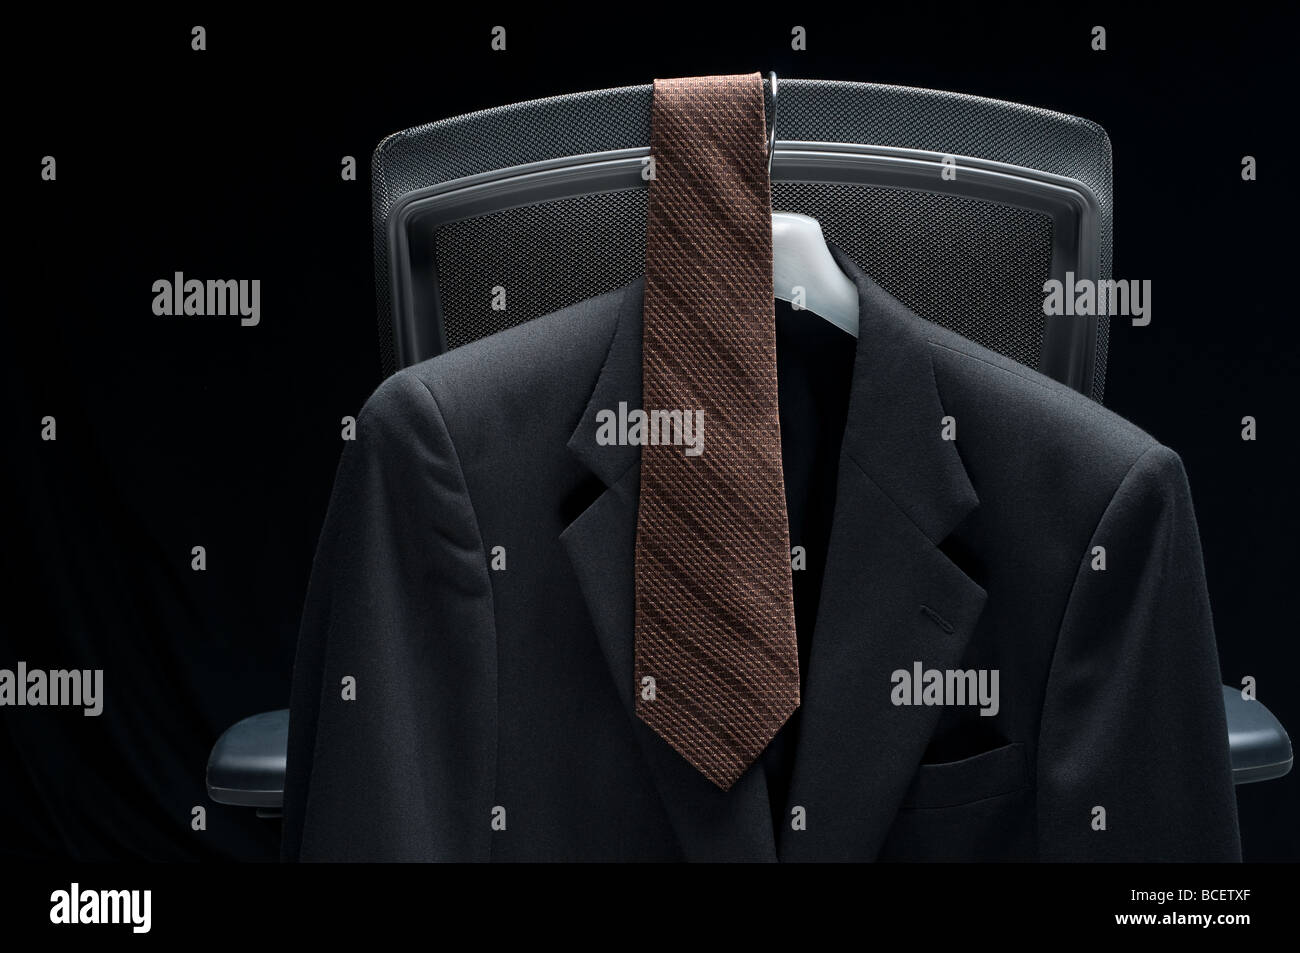 Business jacket and tie hanging on a chair Stock Photo